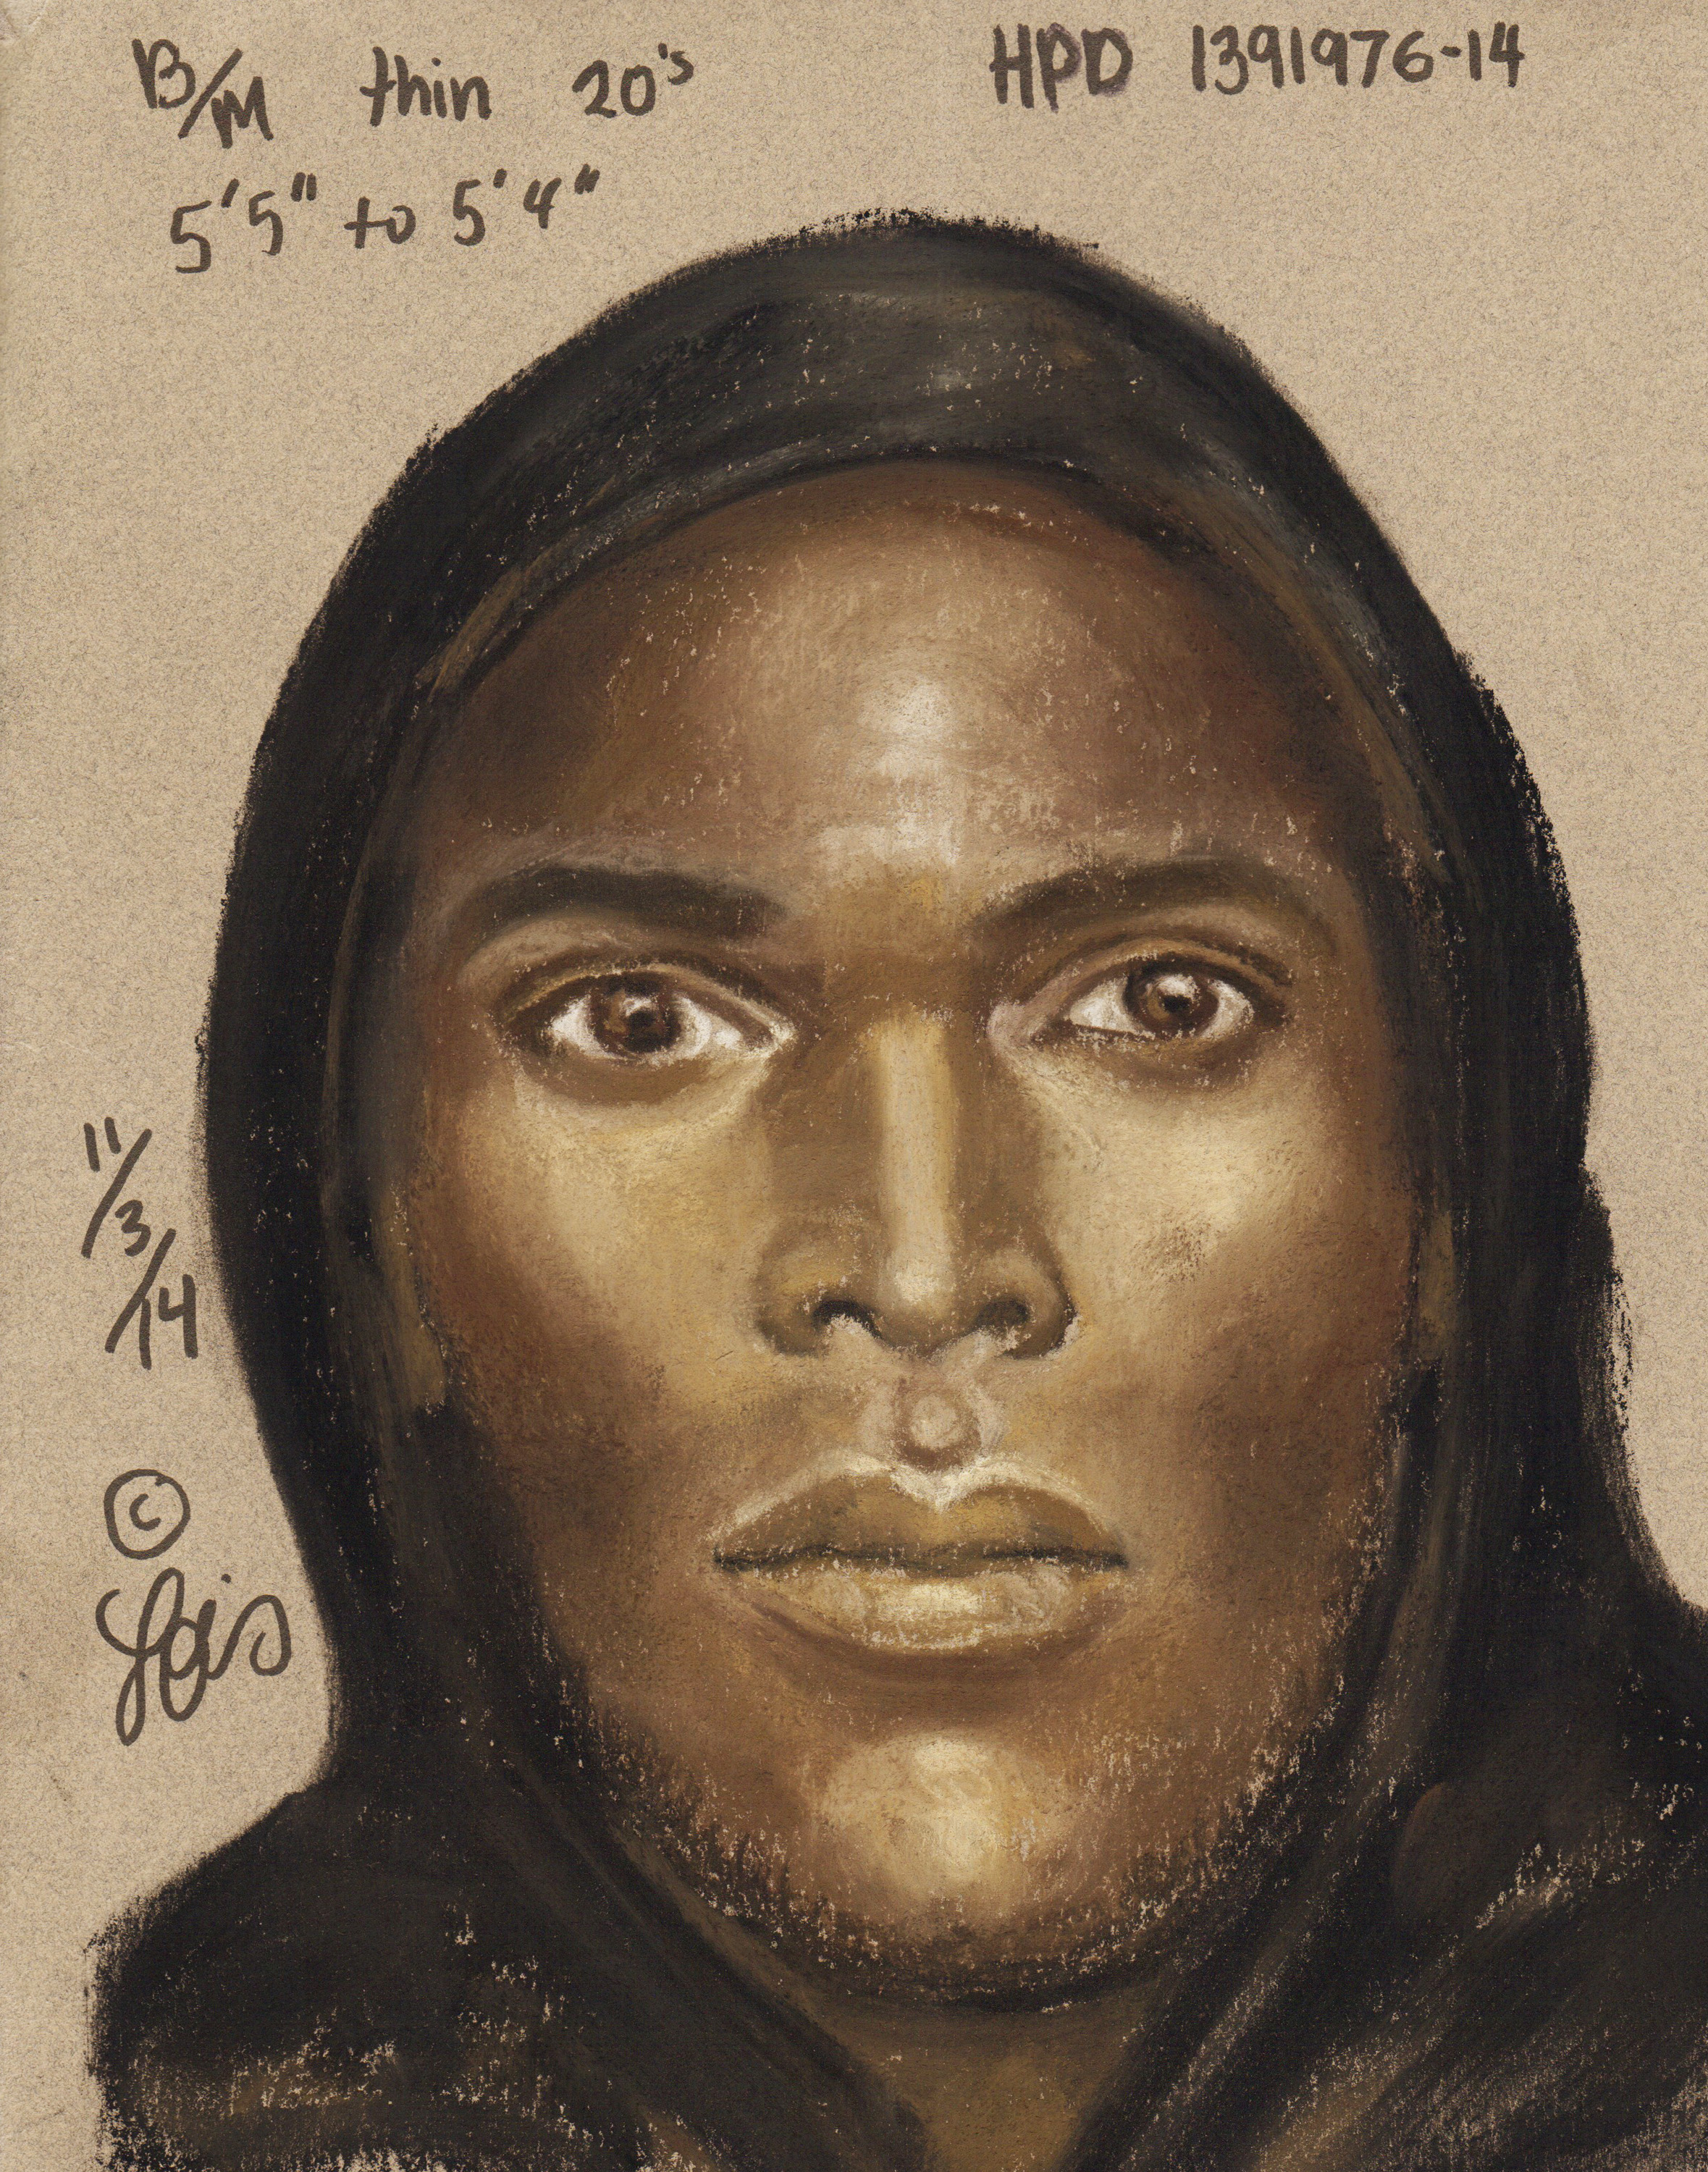 Composite sketch of a wanted suspect 